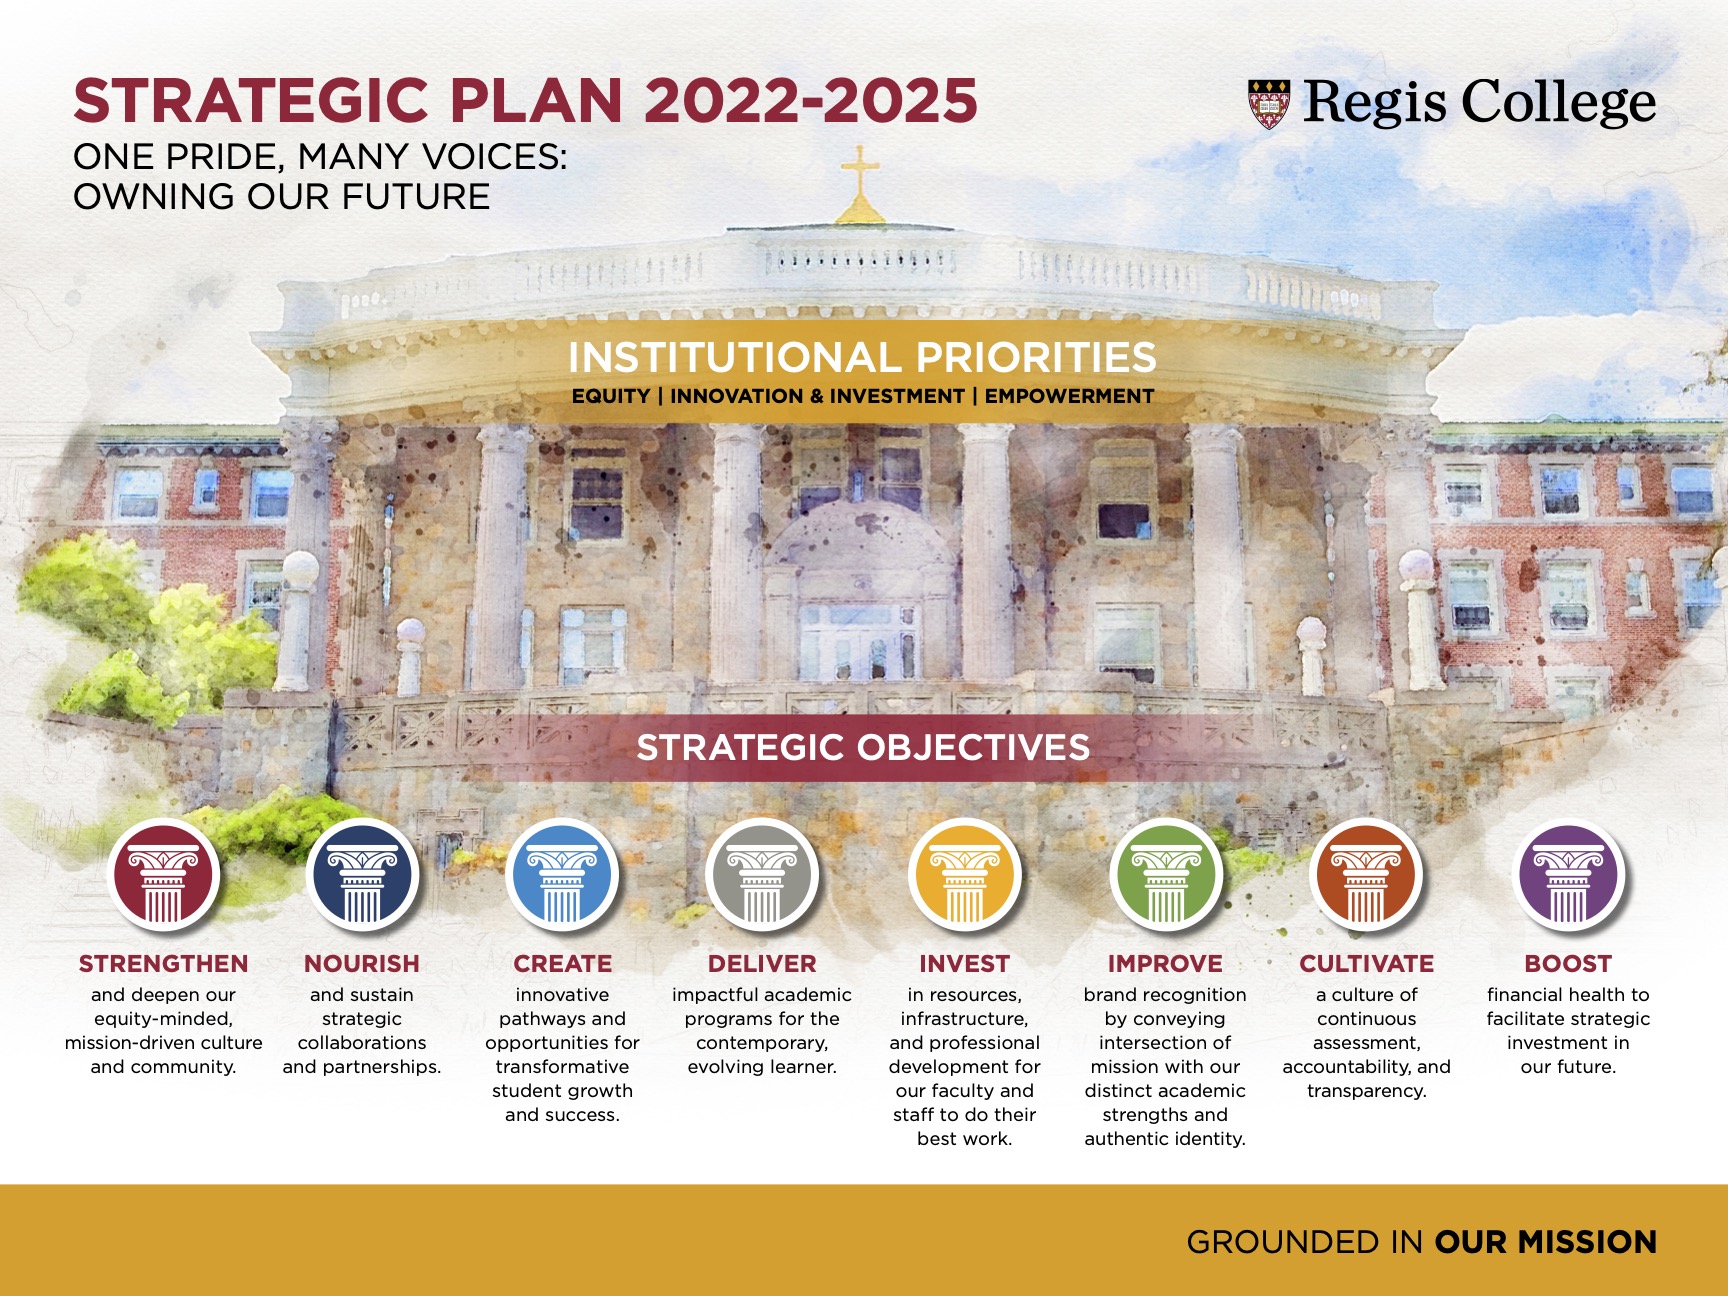 Watercolor painting of College Hall with infographic of strategic objectives overtop